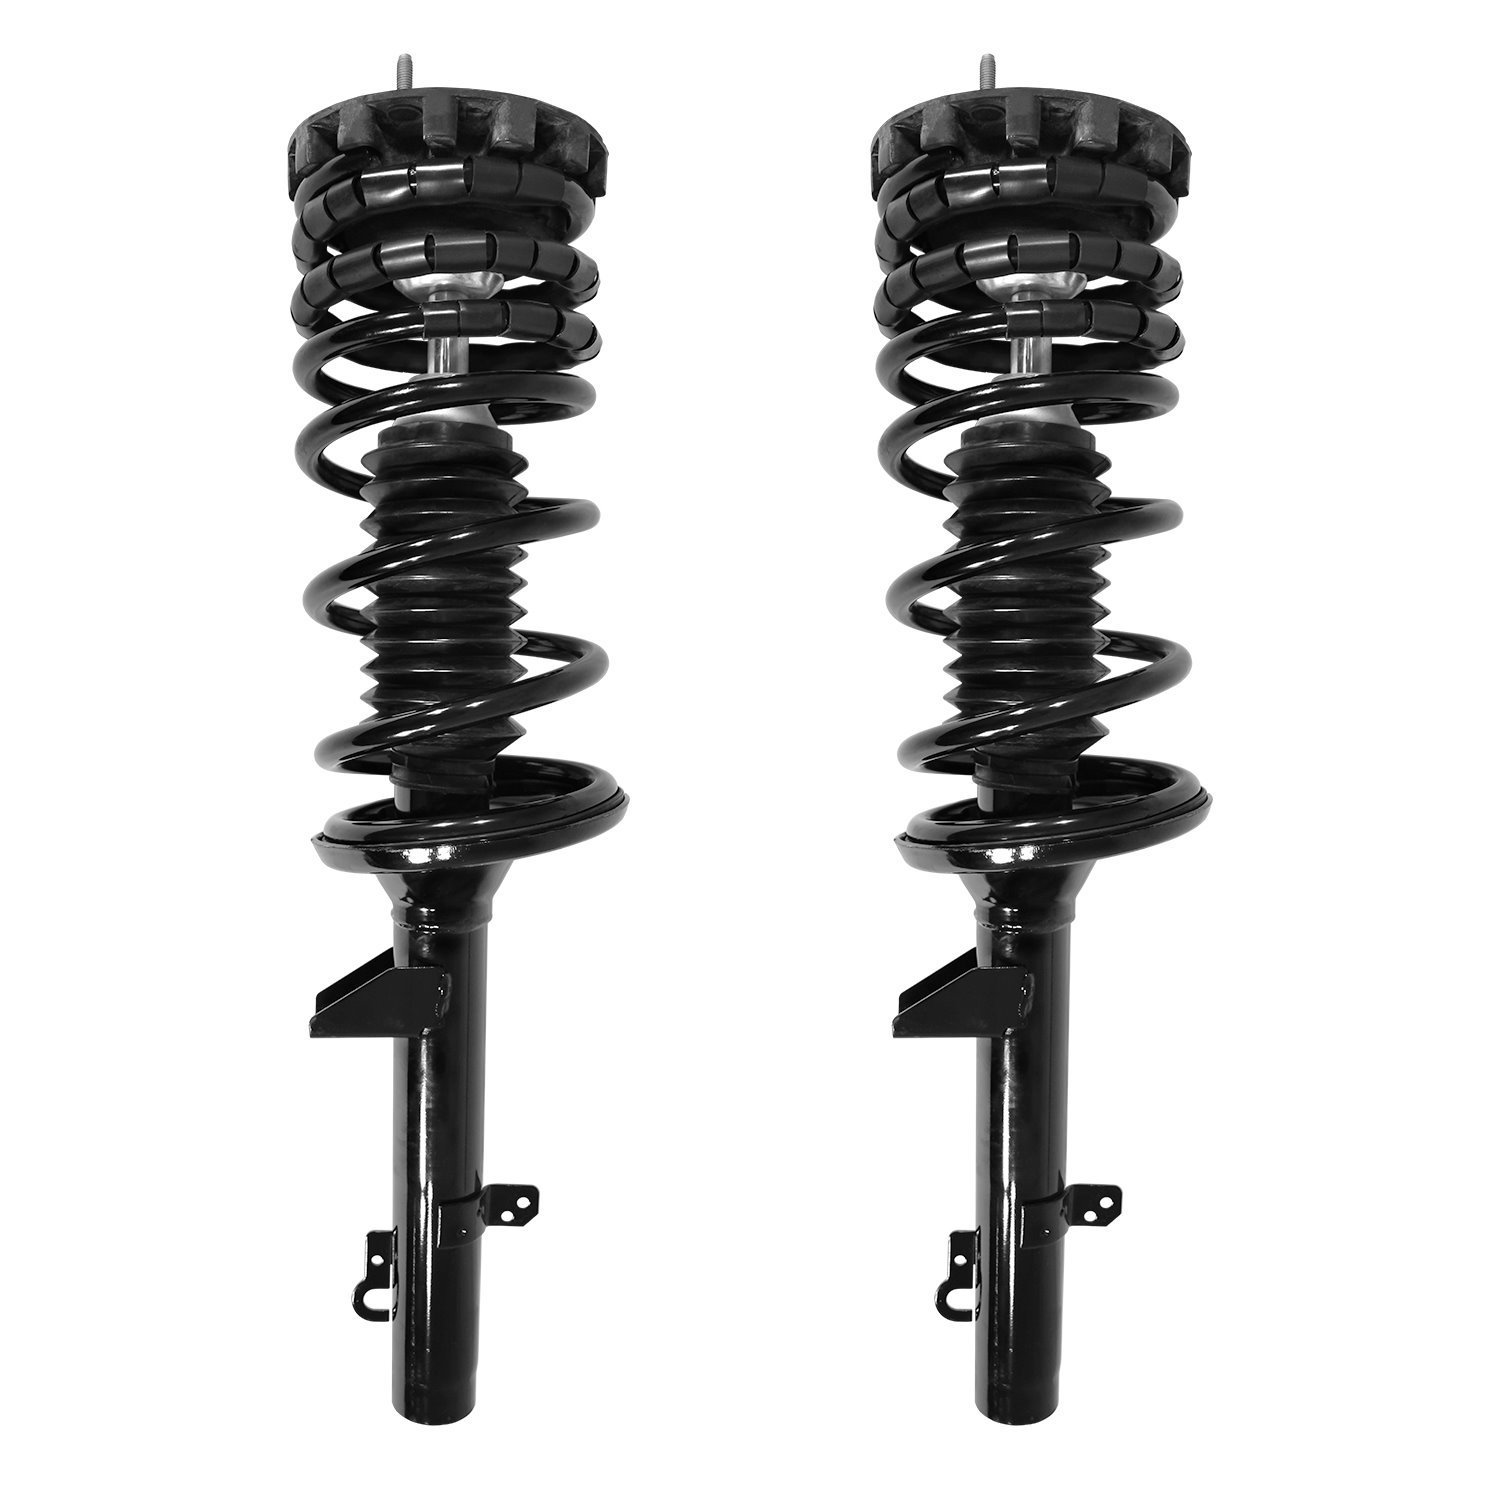 2-15250-001 Suspension Strut & Coil Spring Assembly Set Fits Select Ford Taurus, Mercury Sable